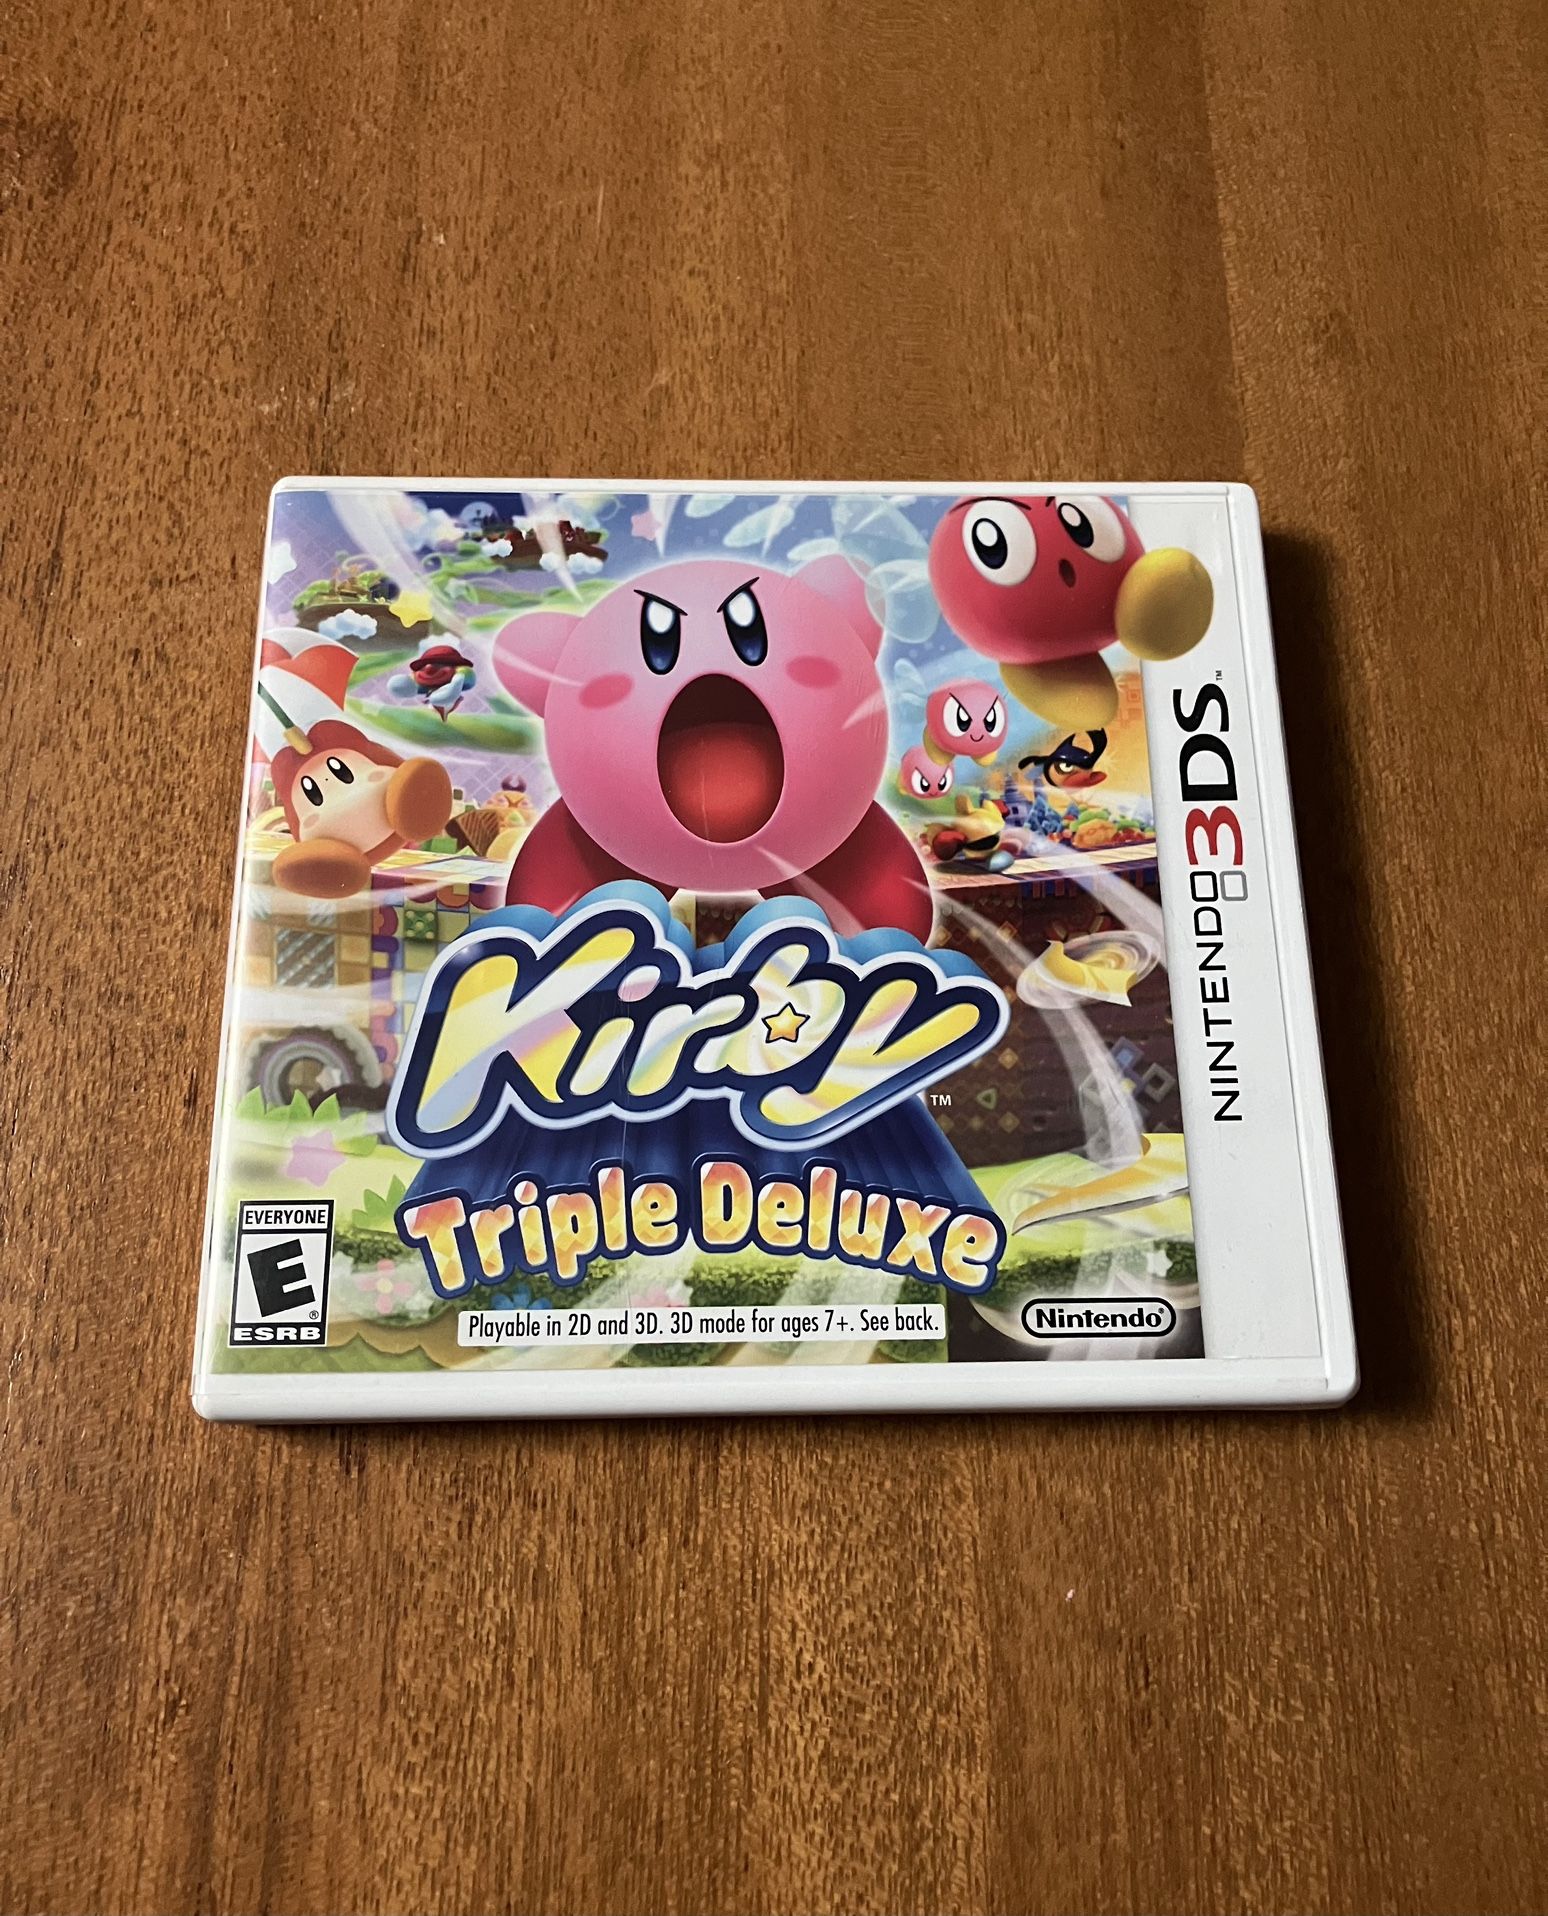 Kirby Triple Deluxe for Nintendo 3DS XL New 2DS game System Console Kirby’s Kirbys